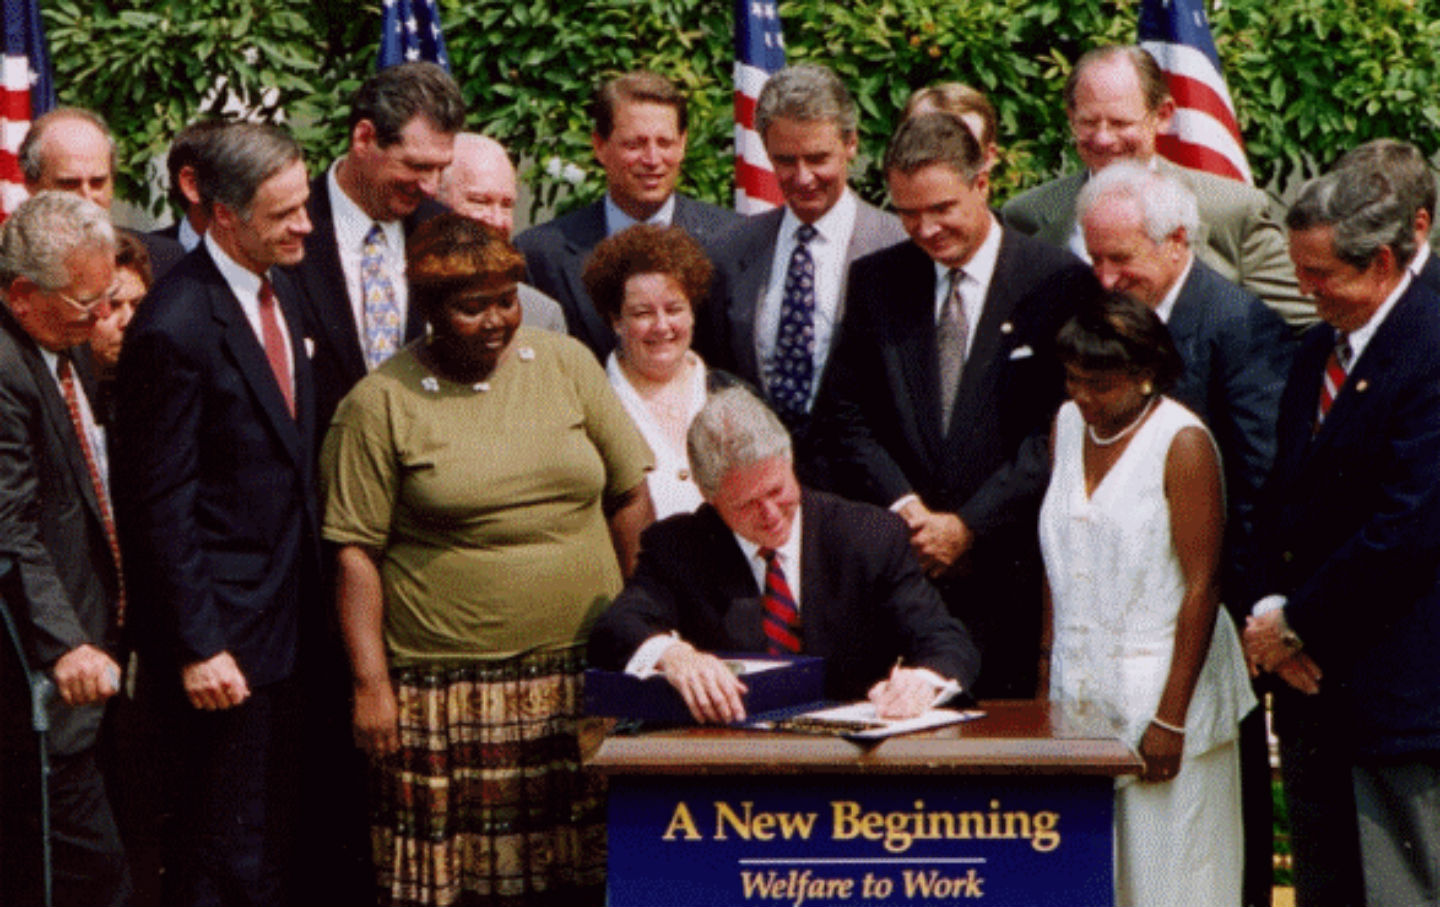 August 22, 1996: Bill Clinton Ends Welfare As We Know It